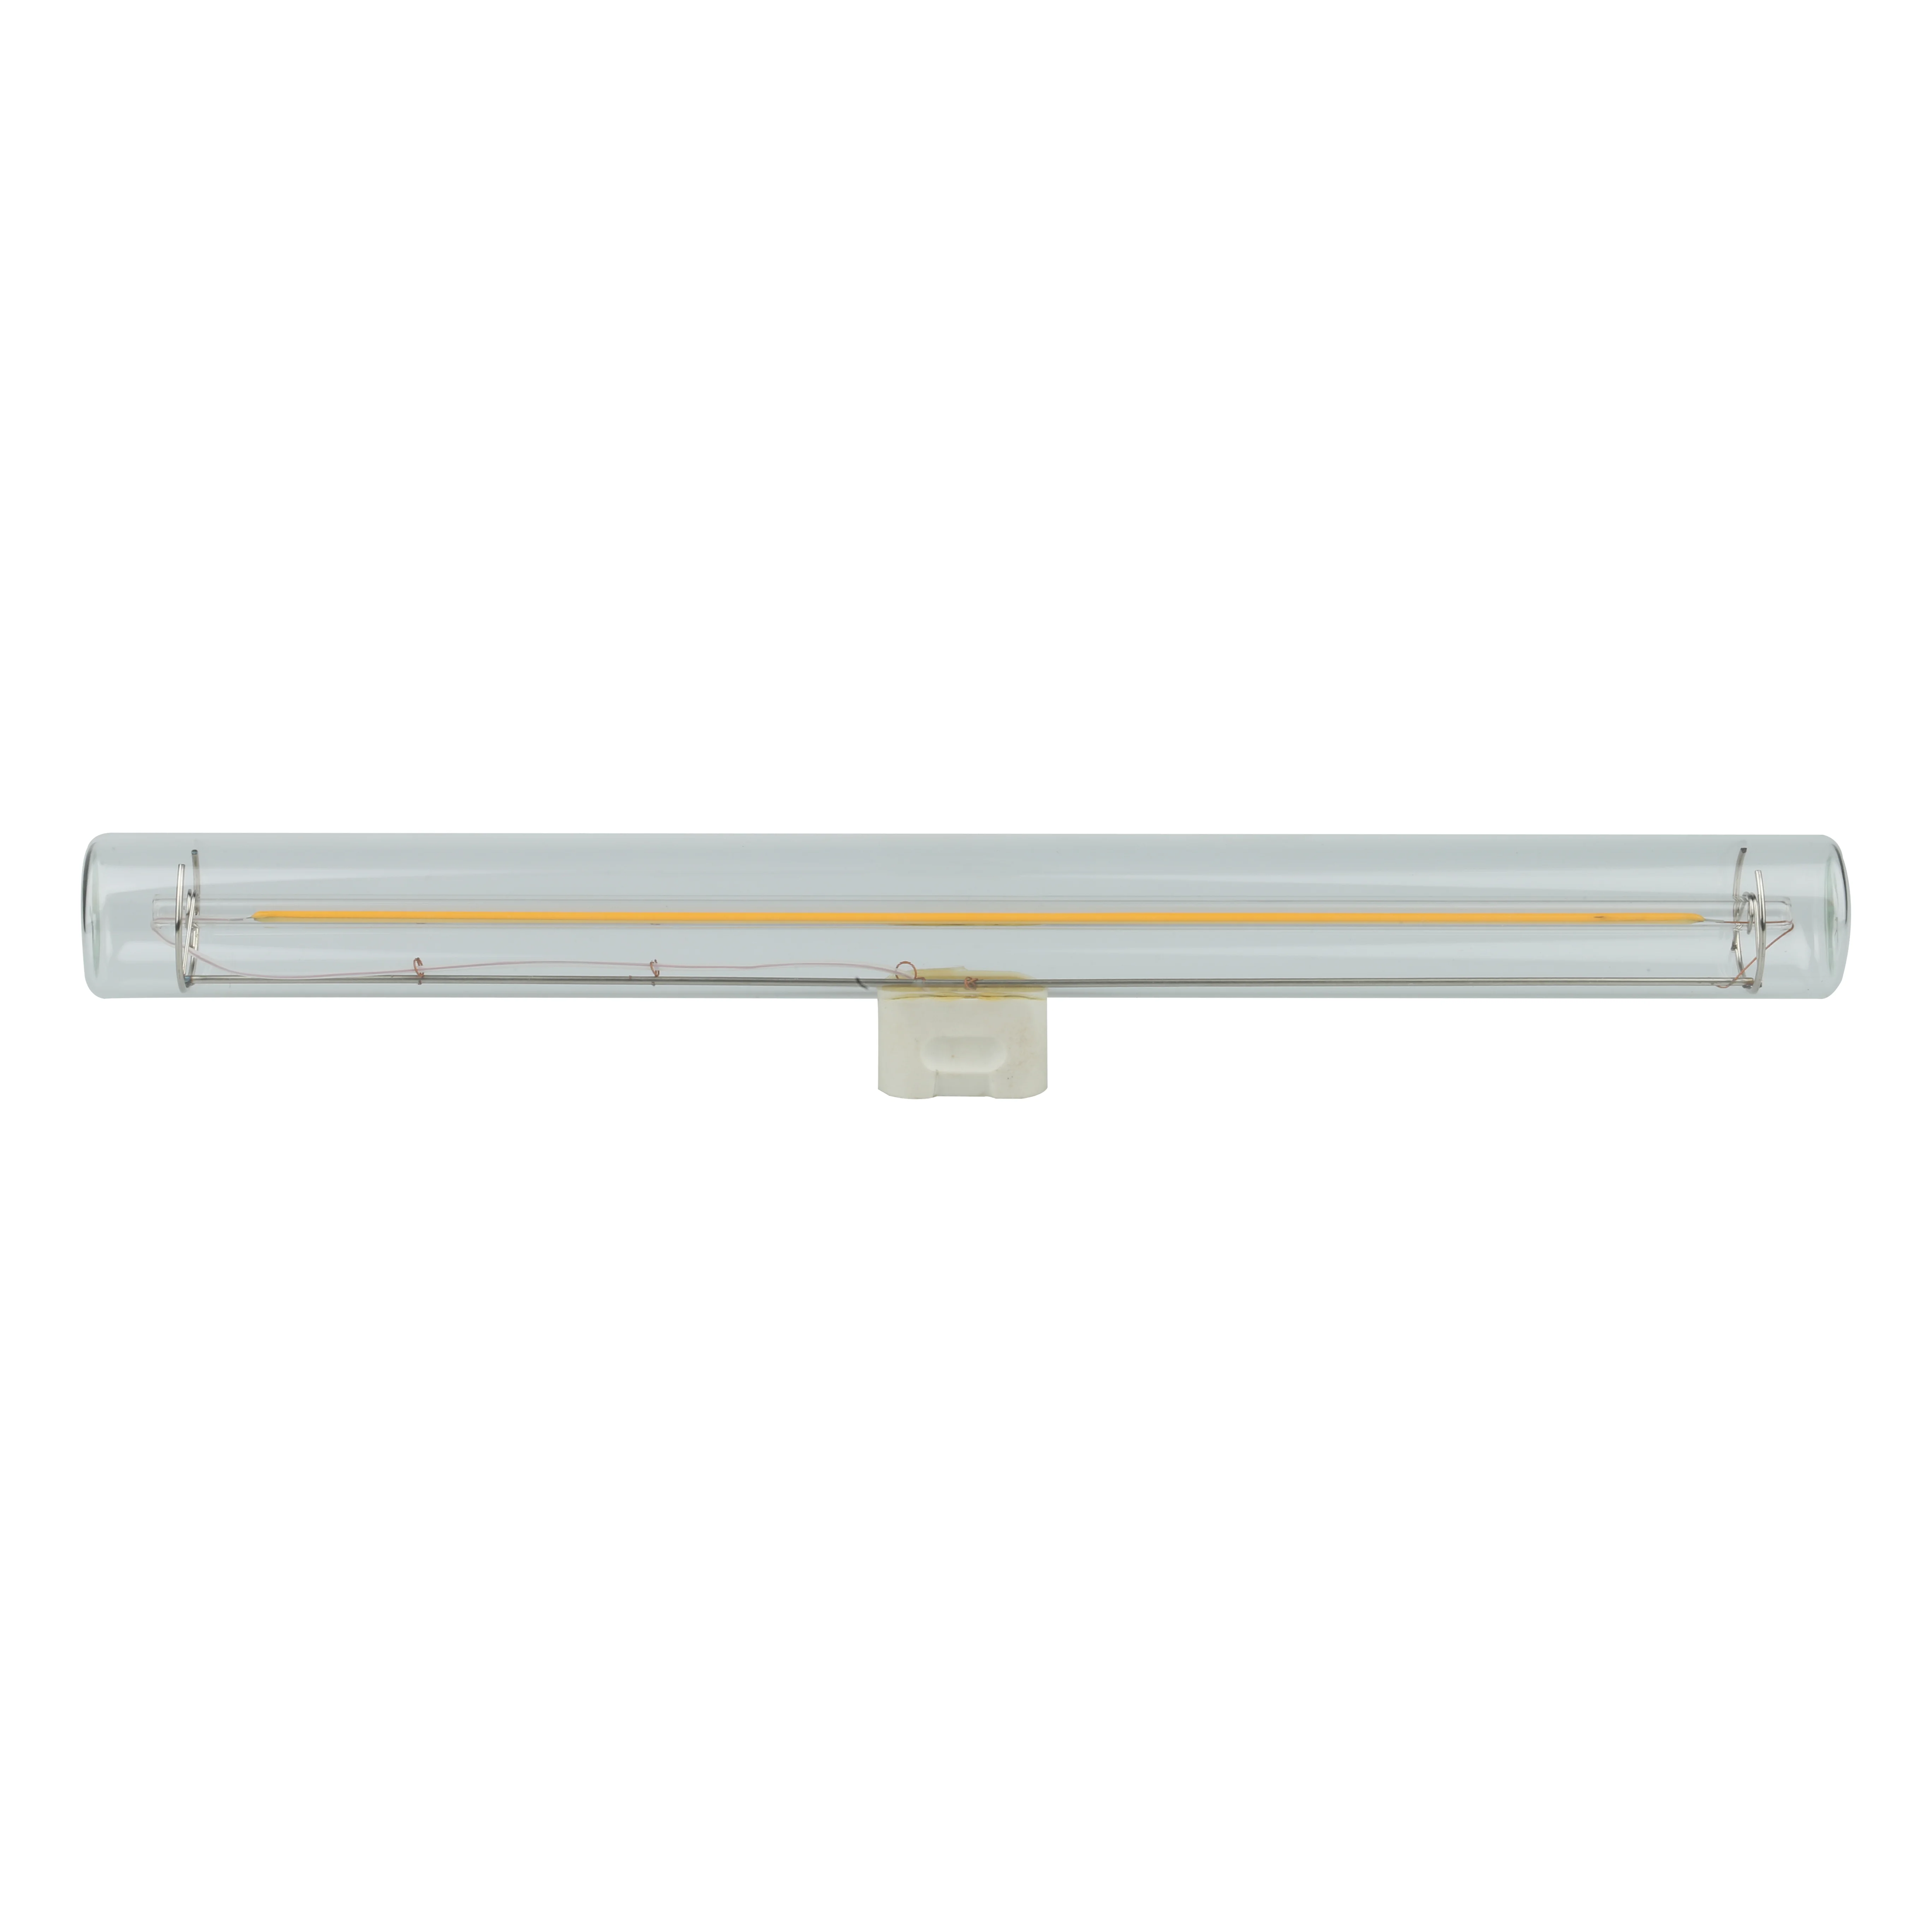 Sentimenteel Skim feedback Dimmable Led Lamp Linestra S14s S14d For Wall Light Cube Mirror S14 Led  Tube Light 300mm 500mm 1000mm Ce Rohs - Buy Linestra S14s,Linestras 1000mm, Led Tube Light Product on Alibaba.com